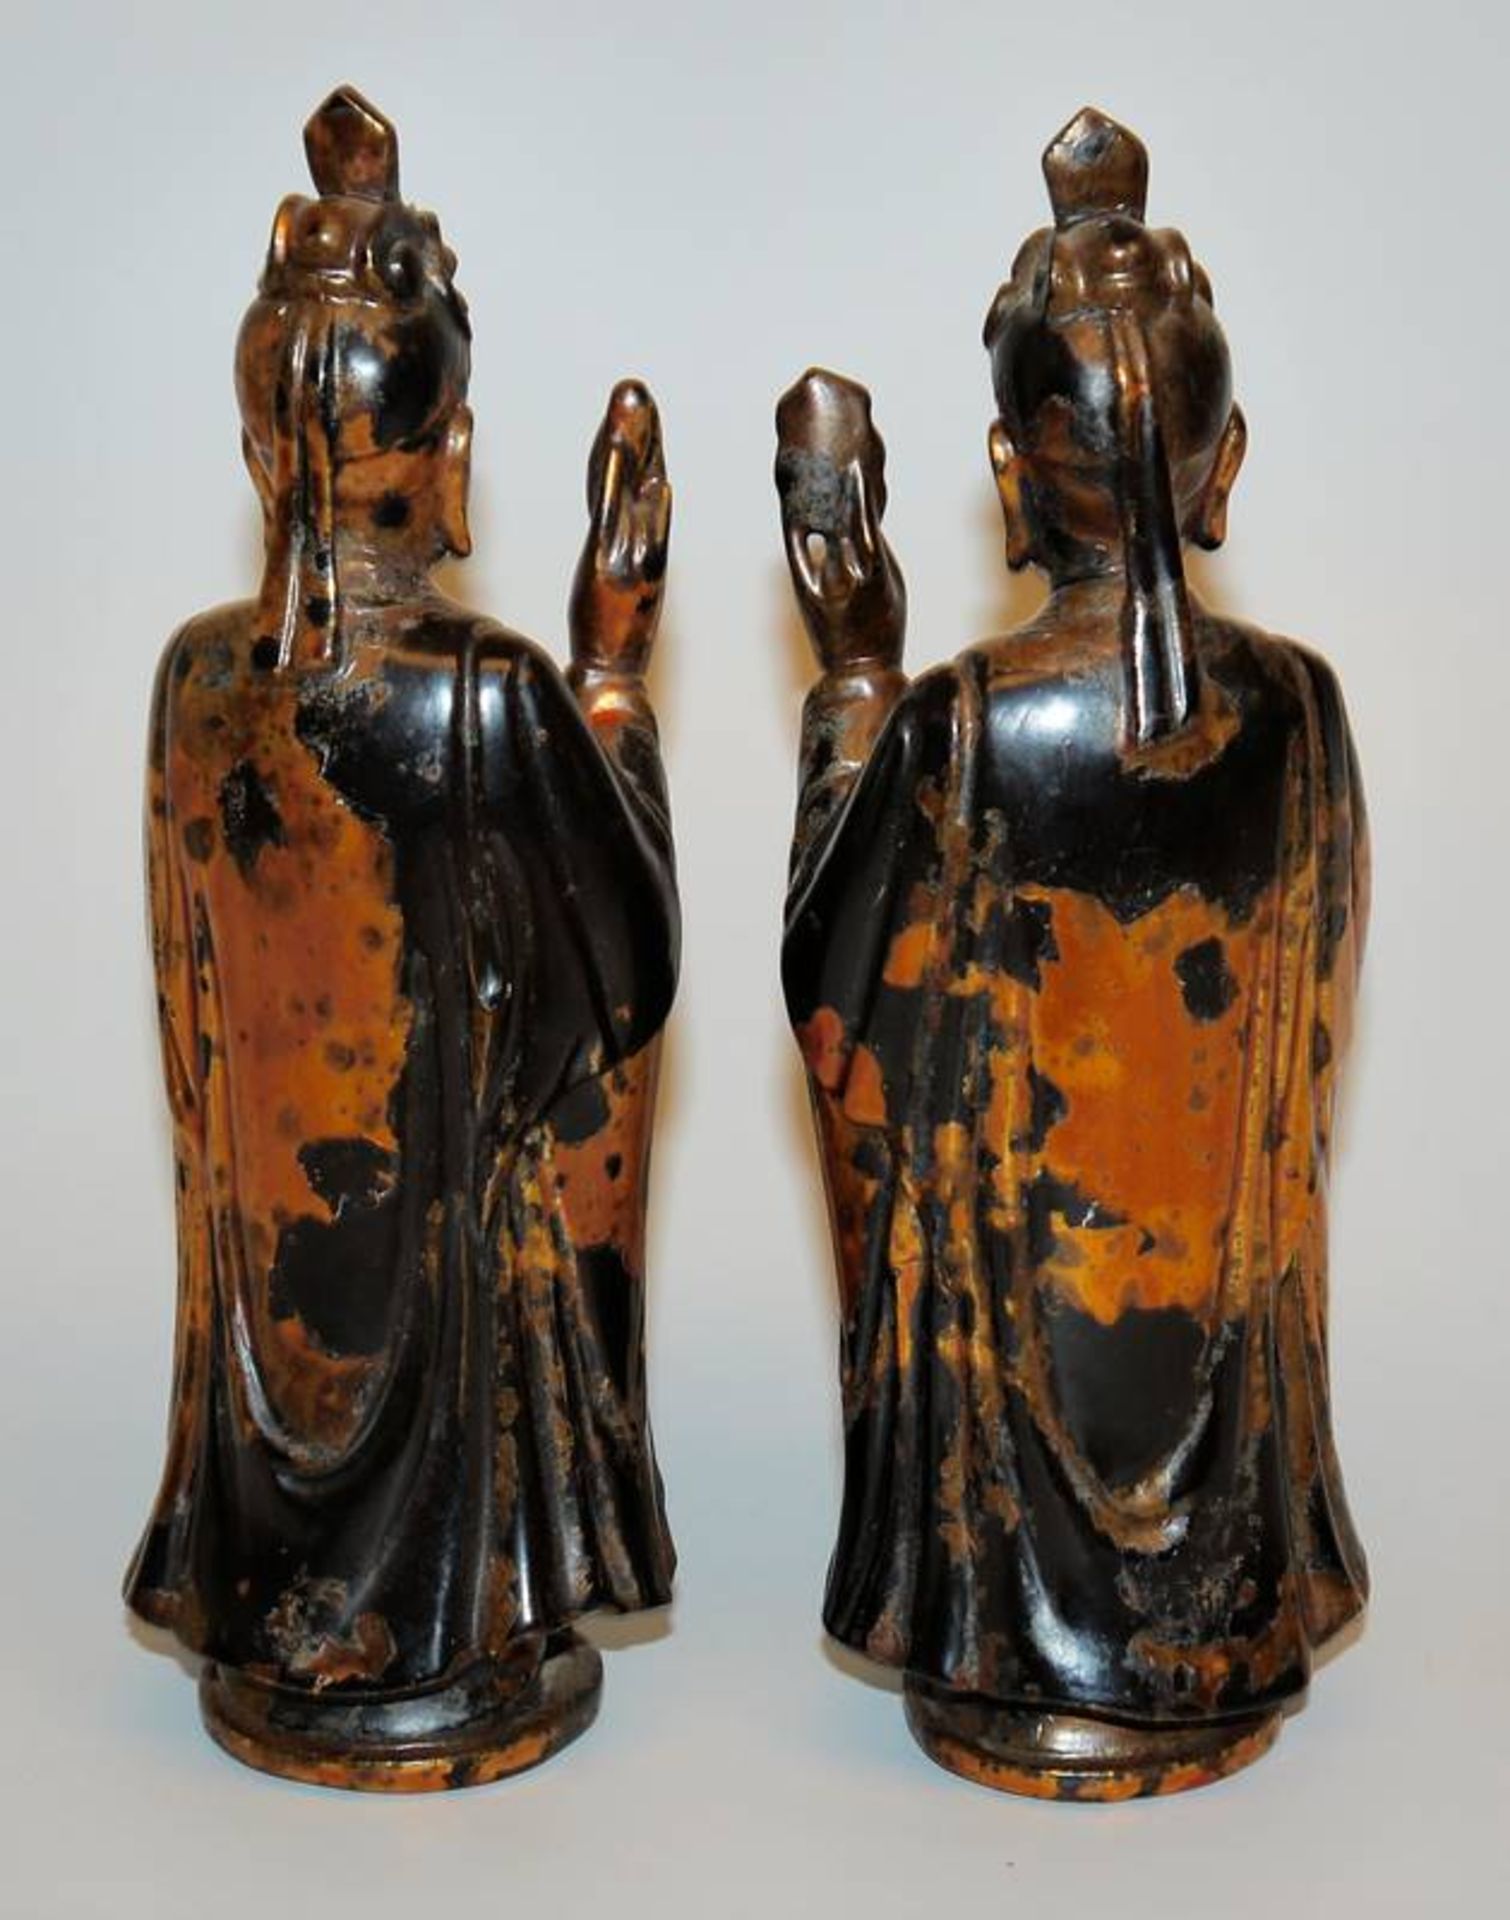 Two lacquered altar figures, Vietnam 18th/19th century - Image 2 of 2